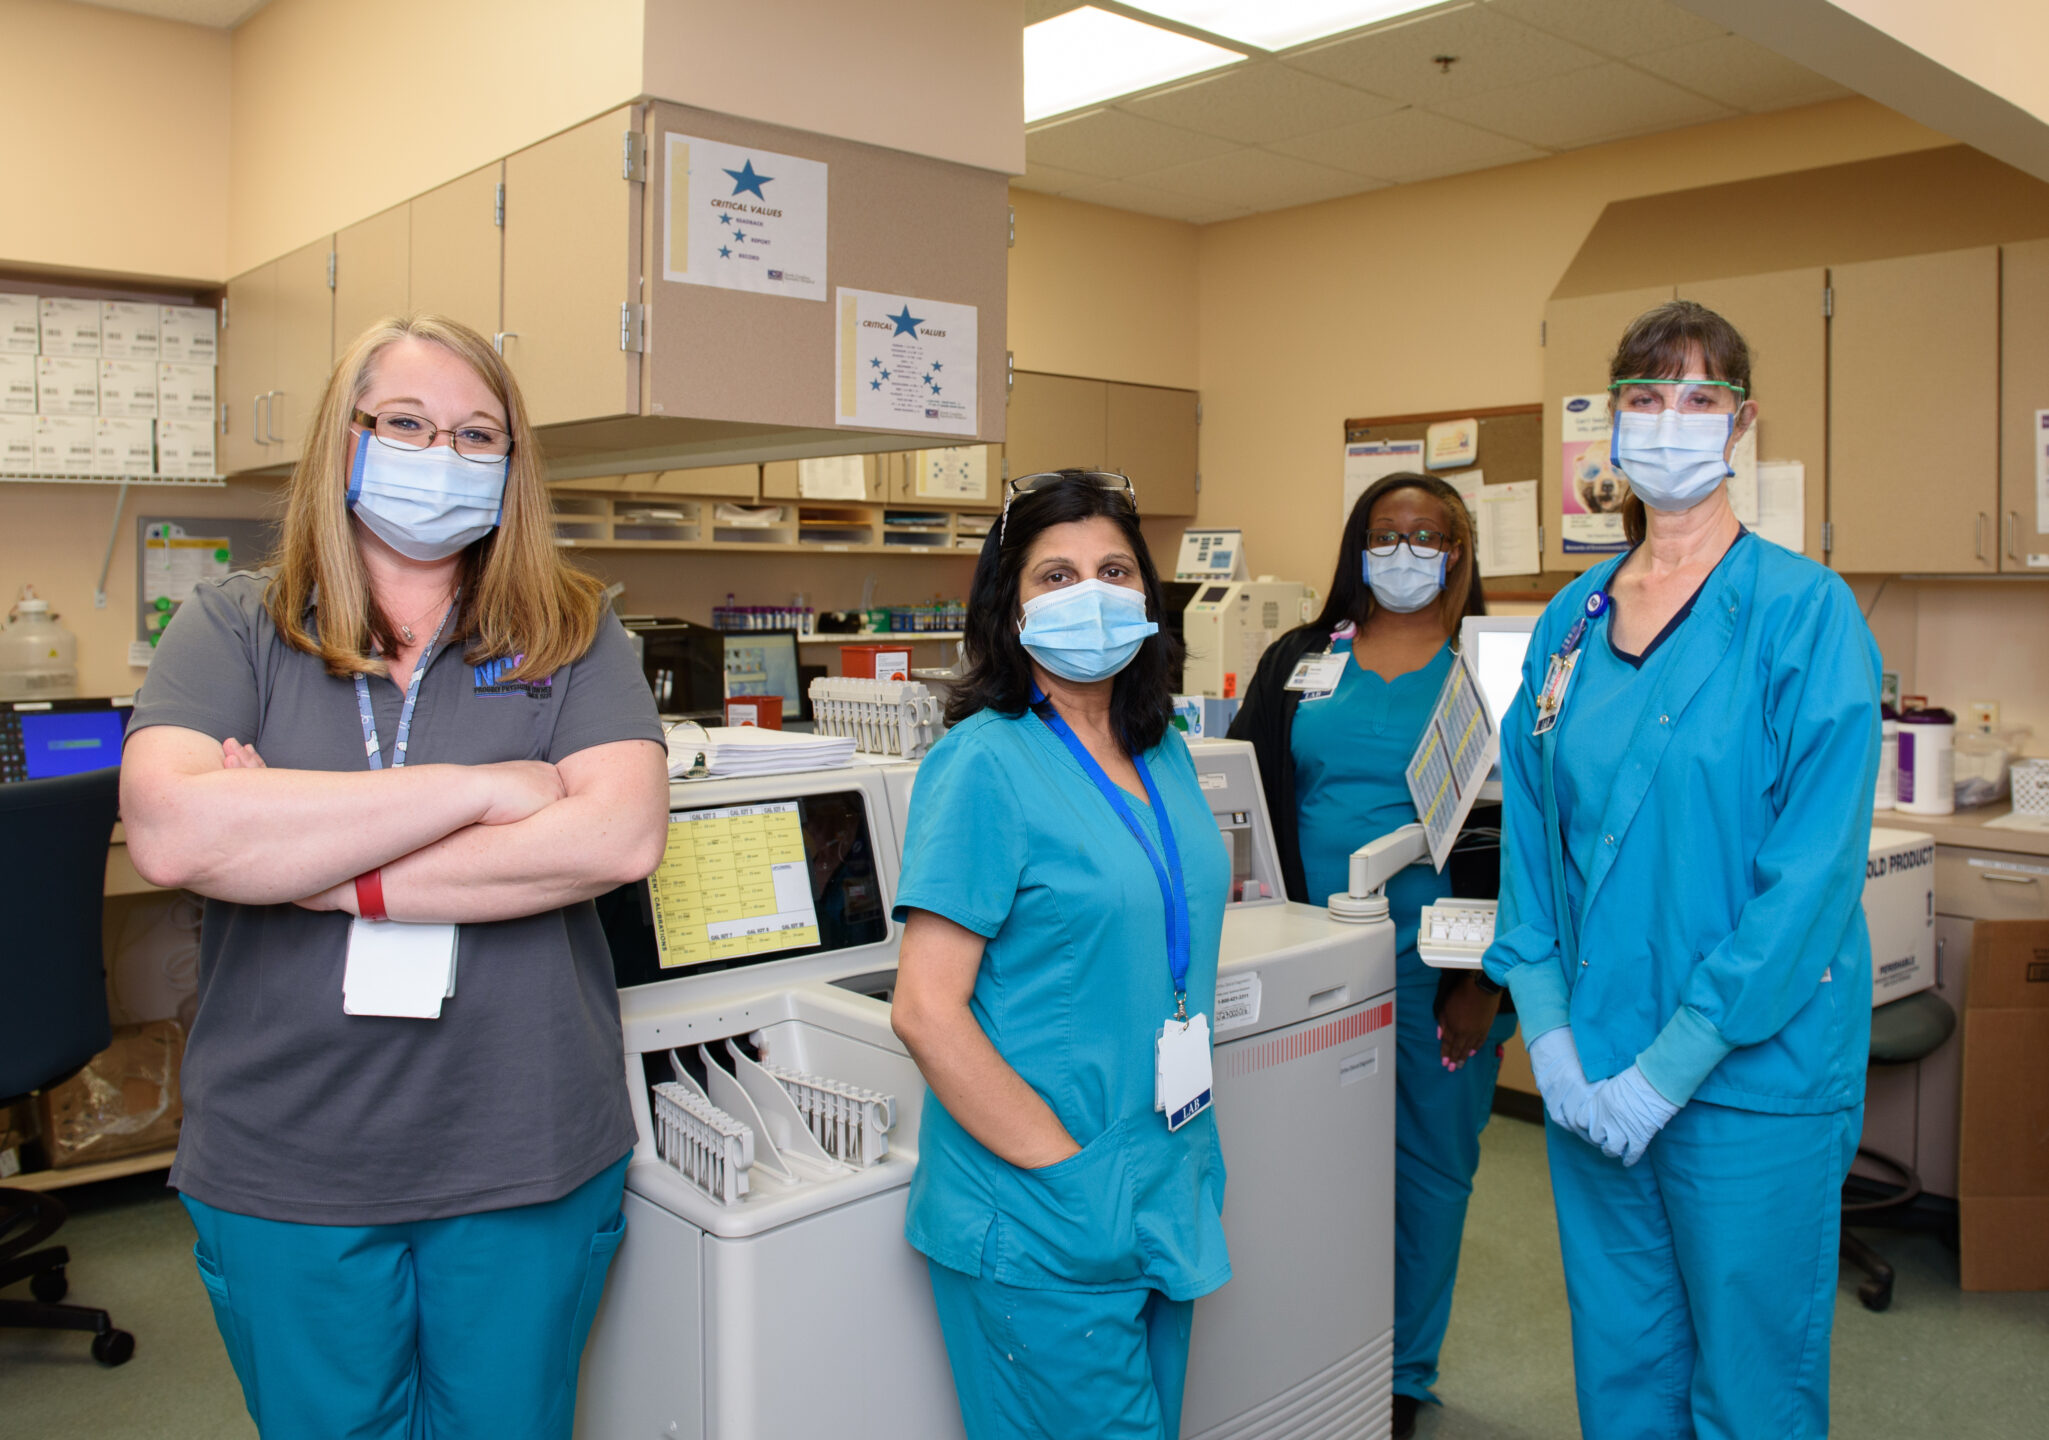 Four female staff members in scrubs and masks stand in the office and smile for the camera.
